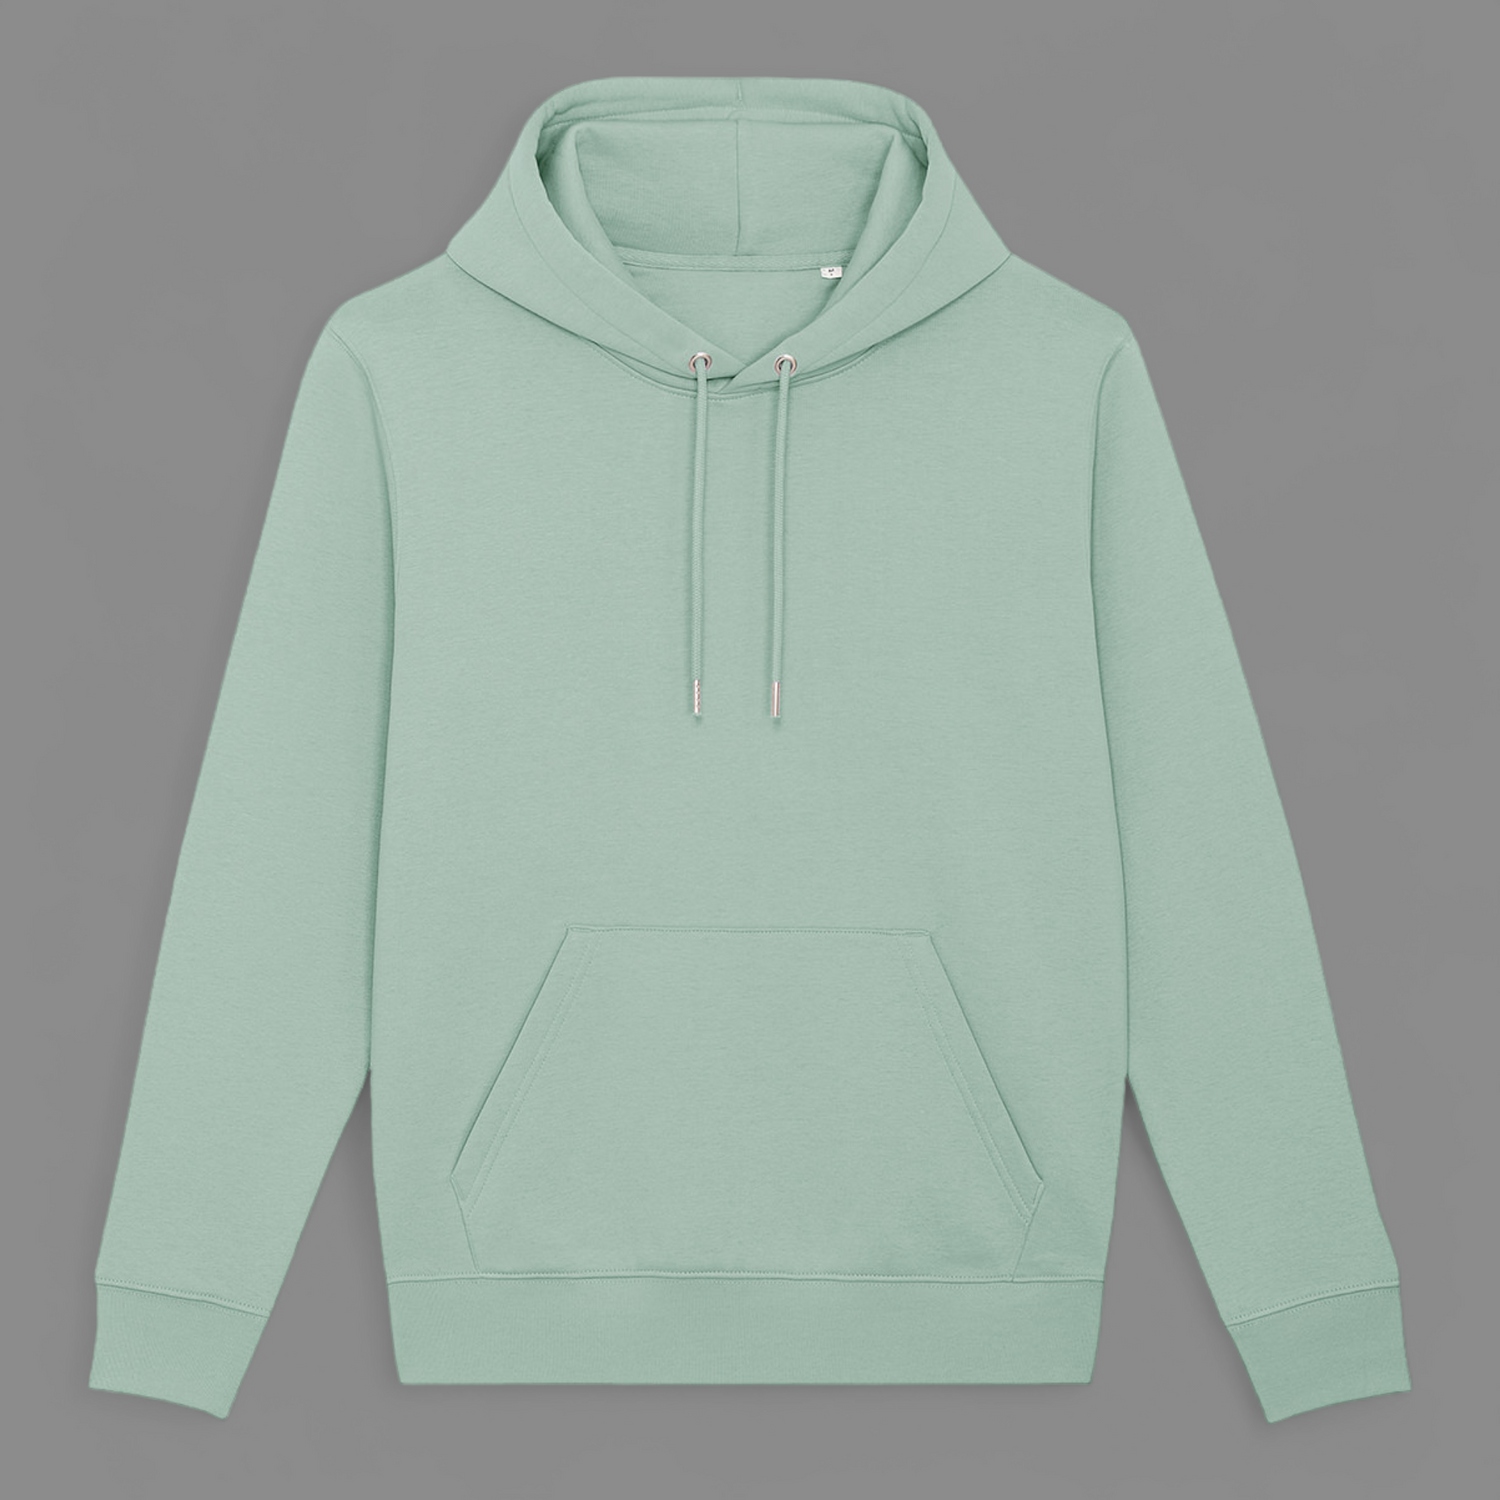 Adult's Hoodie - Create Your Own